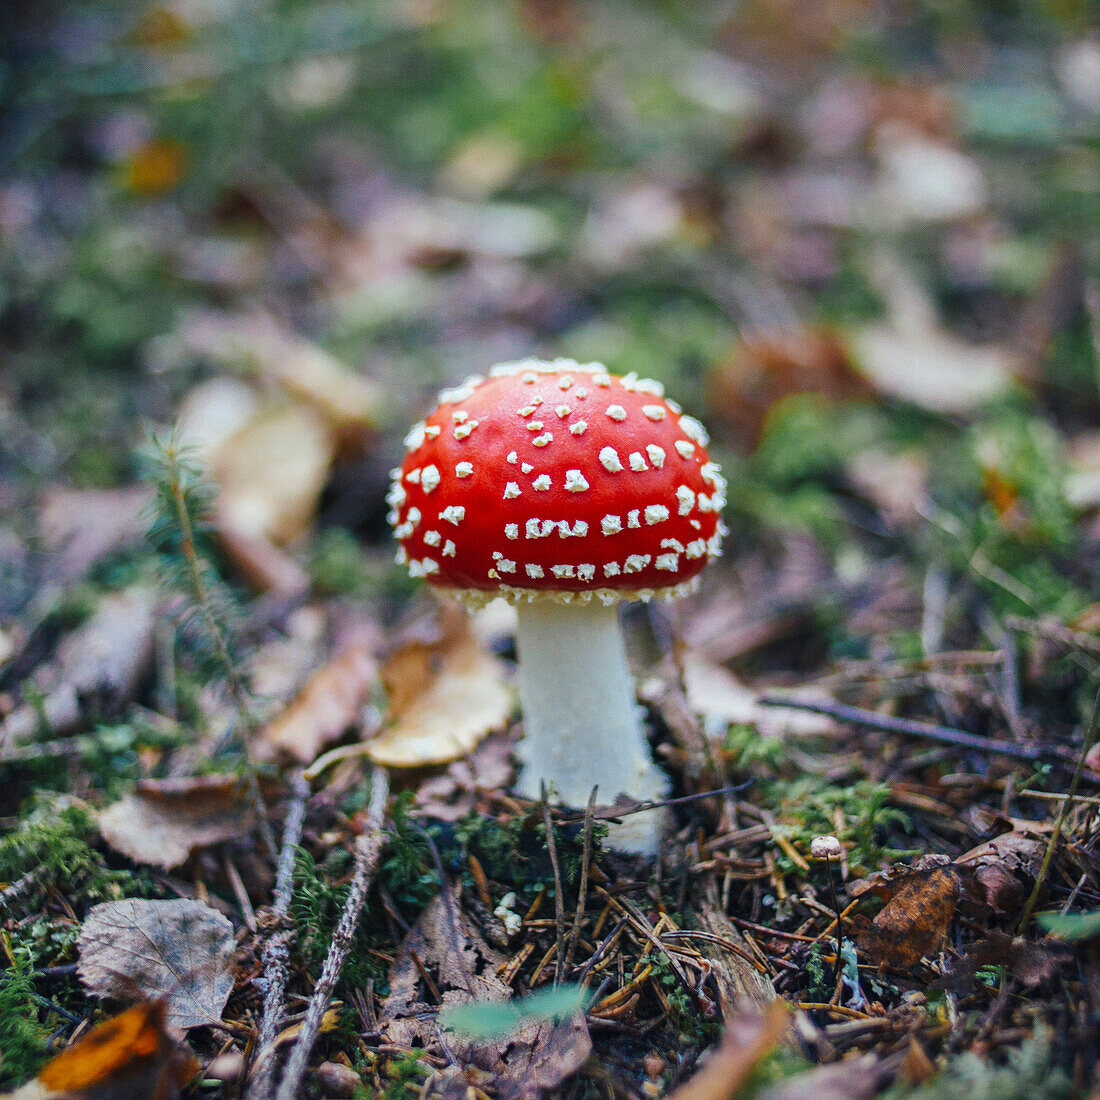 Close-up of fly agaric mushroom growing on land in forest